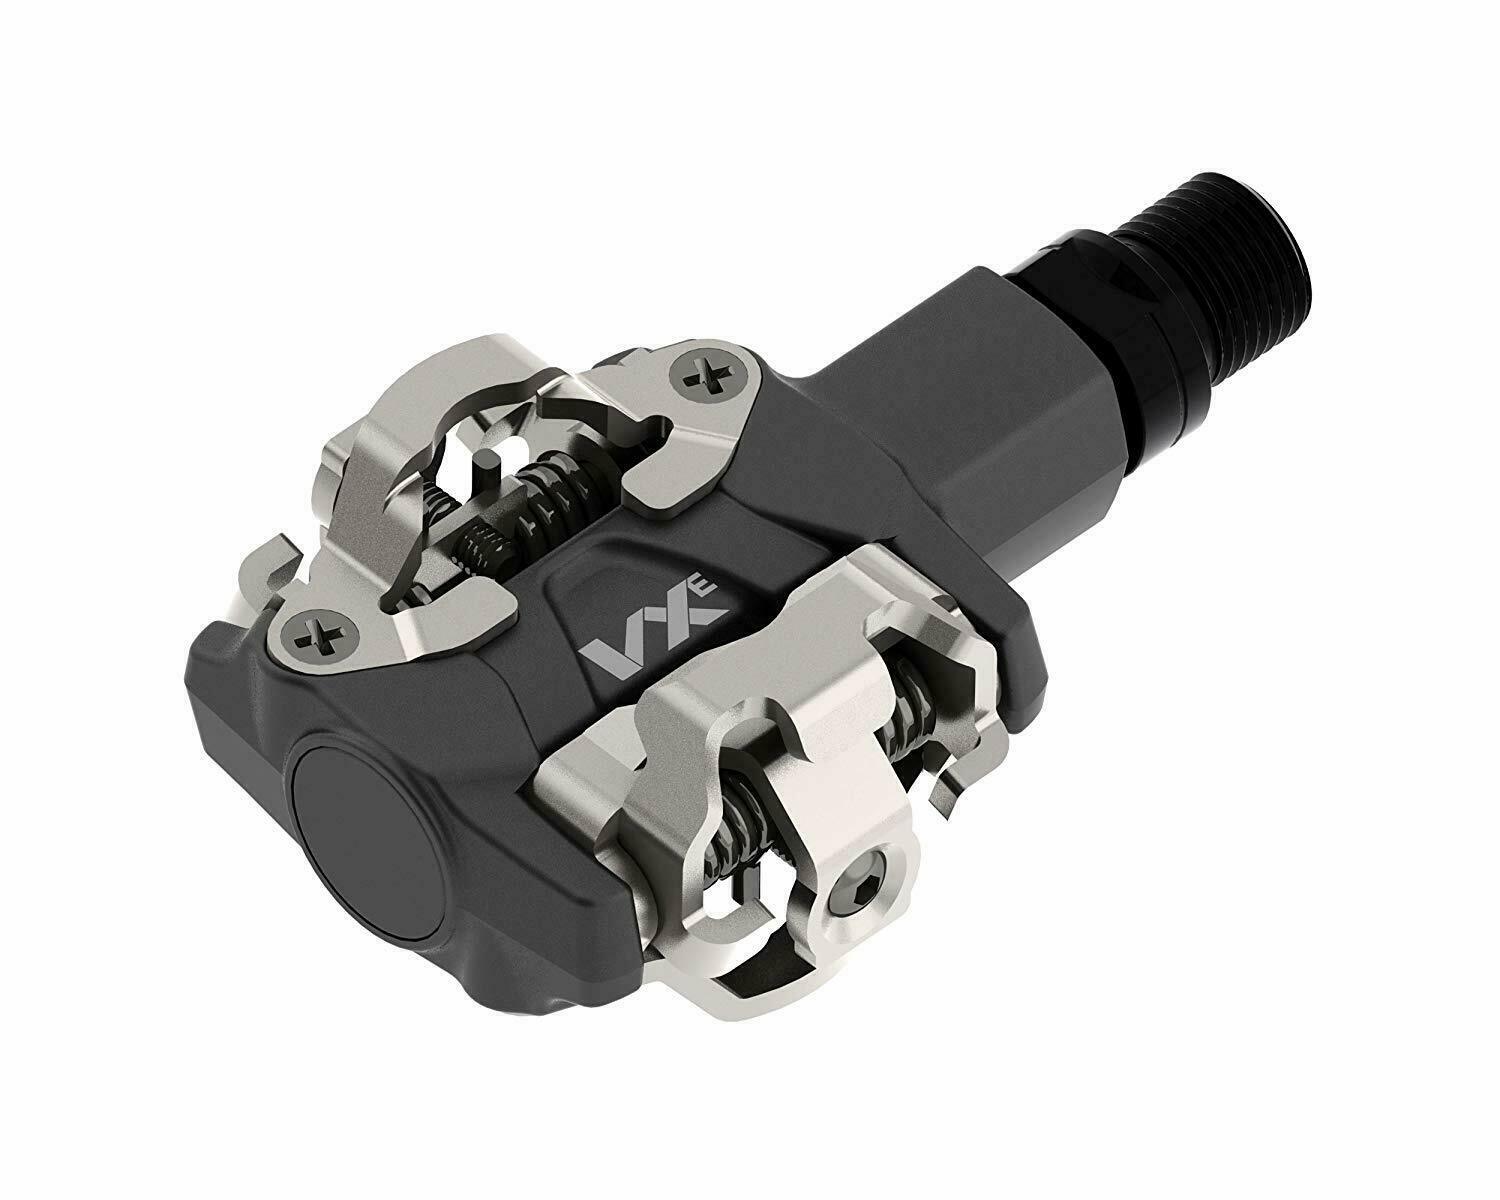 Buy VP VX Trail Race Mountain Bike Shimano SPD Compatible Pedals with ...